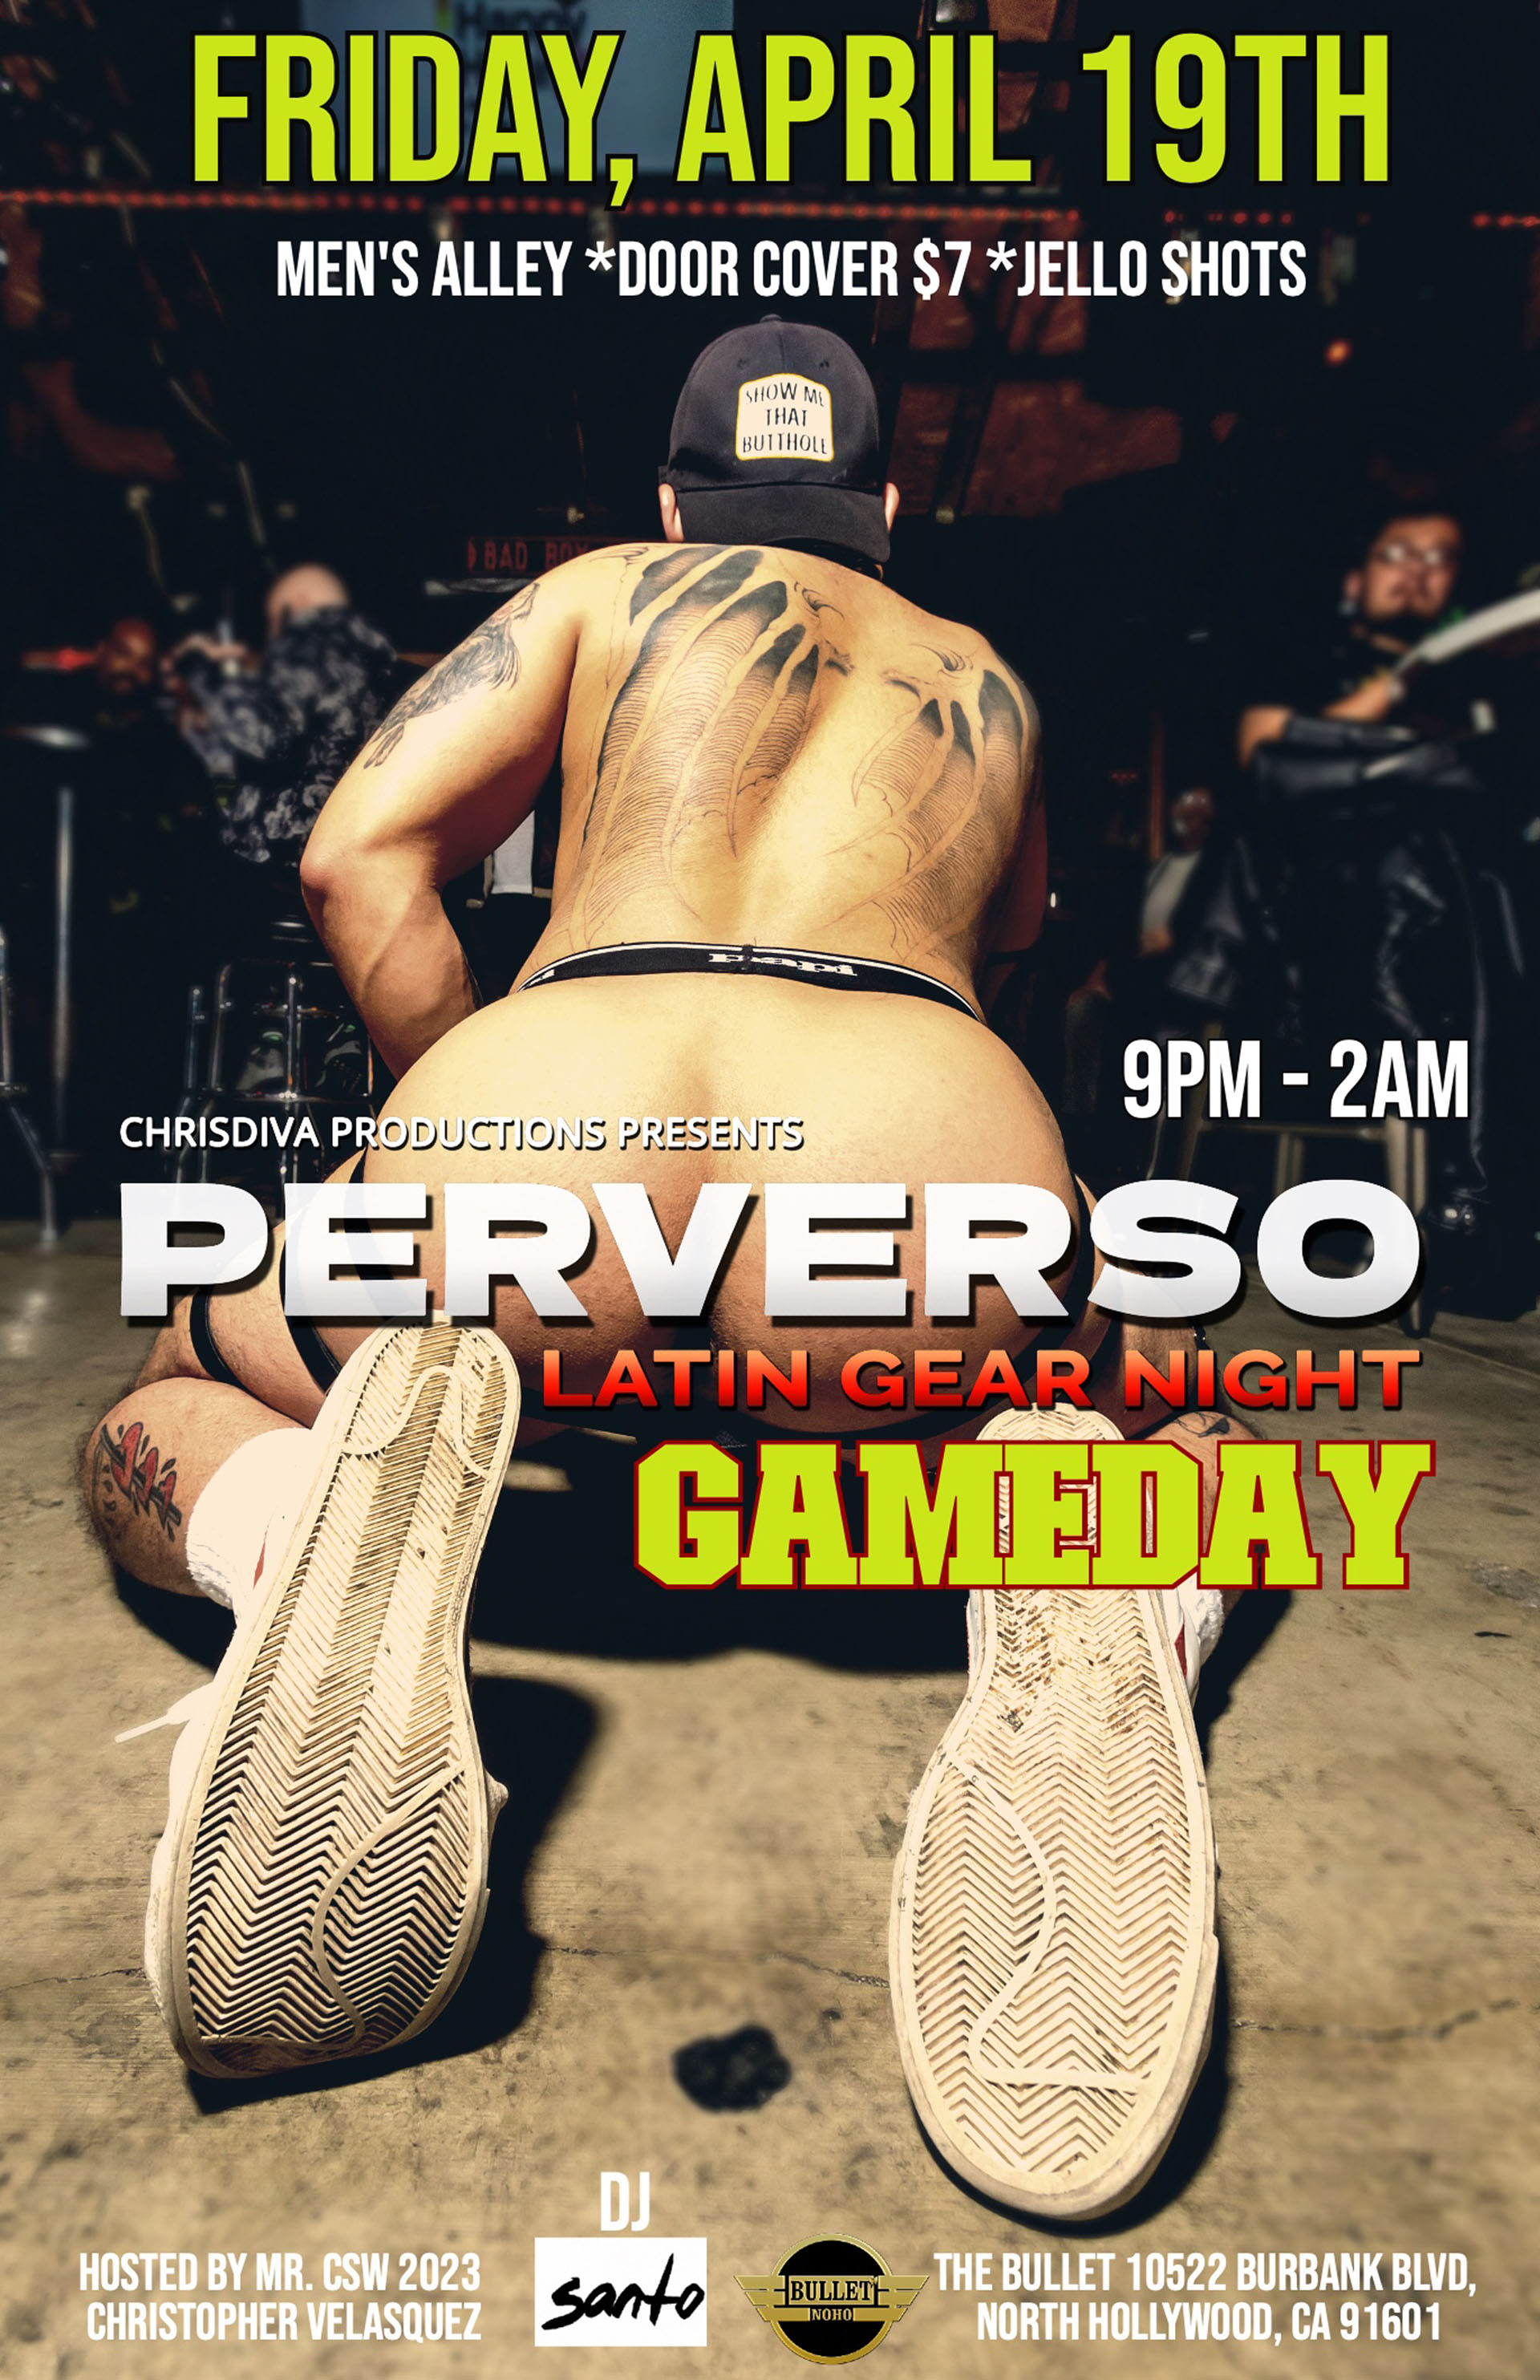 The Bullet Bar and ChrisDiva Productions Present: PERVERSO--Latin Gear Night Hosted by Mr. CSW Leather CSW Chris Velasquez! Friday, 04/19/24 at 9PM. GoGos, Men's Alley, JELL-O Shots. $7 Cover.